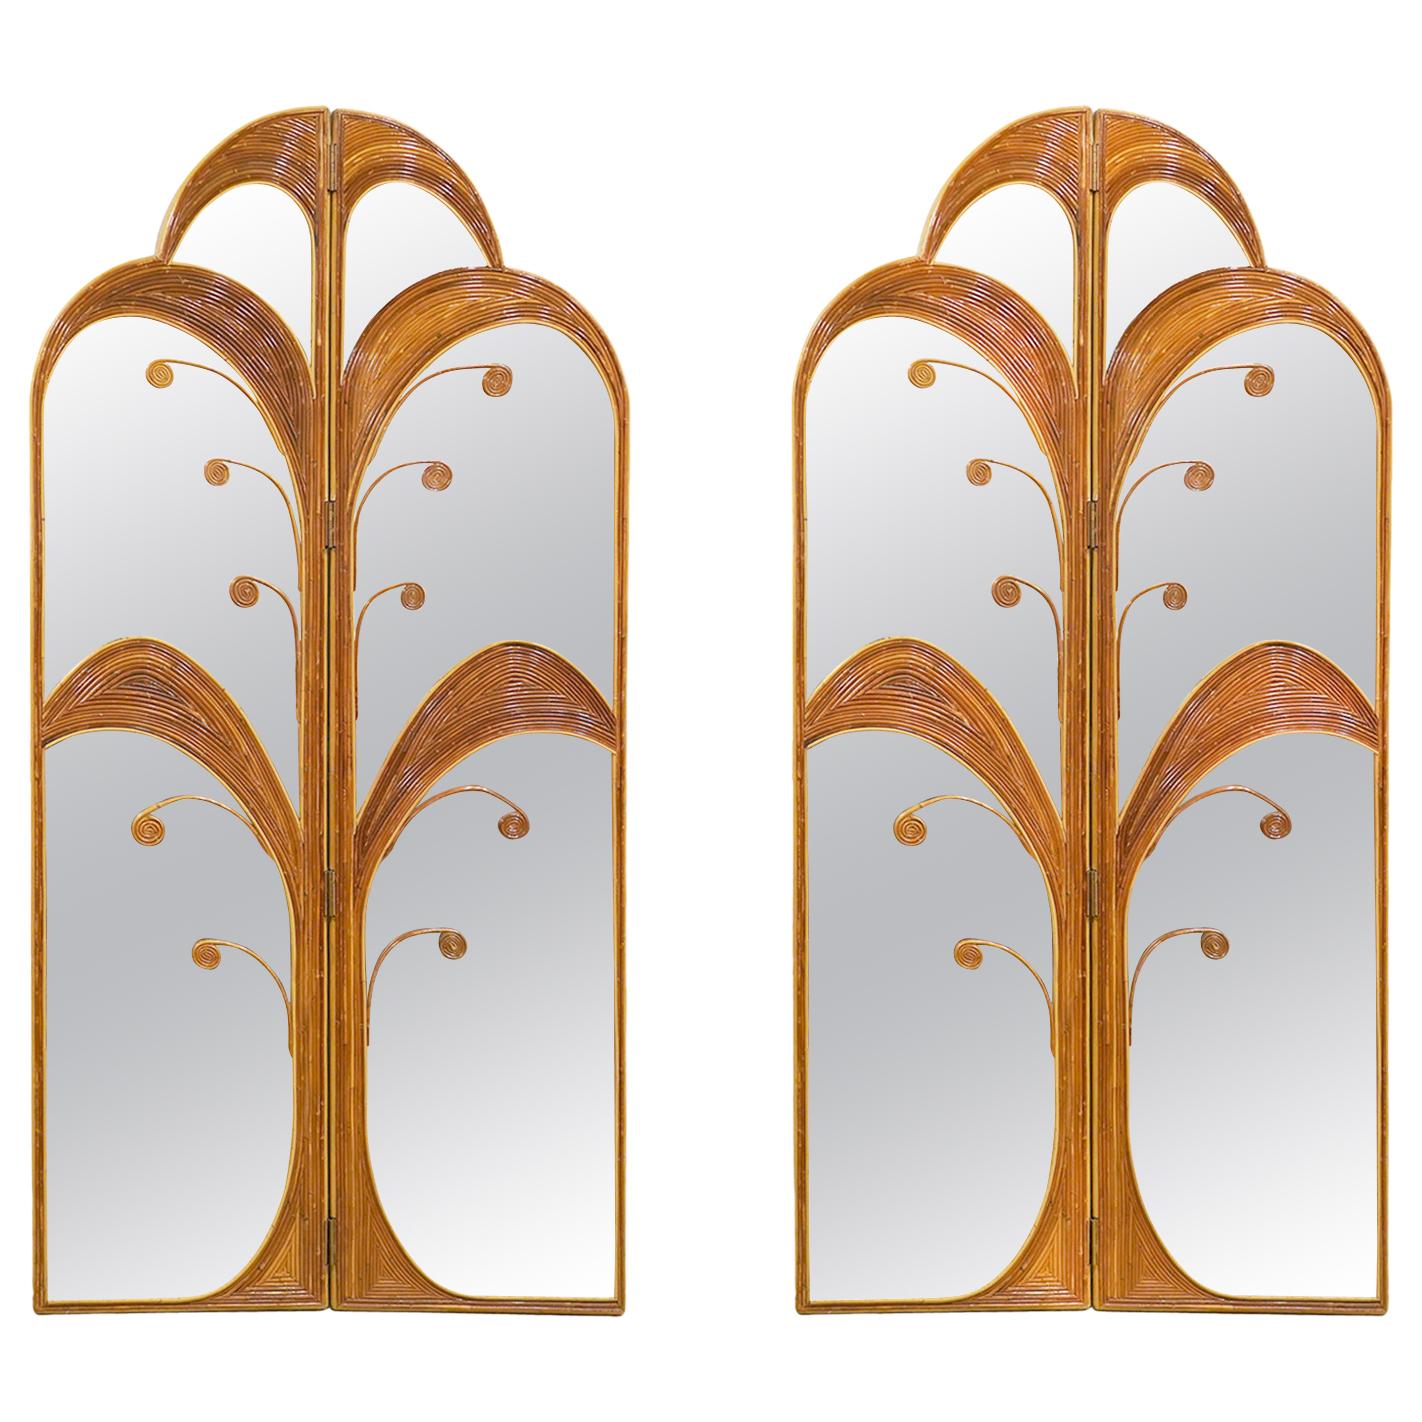 Pair of Mirrored Bamboo Rattan Palm Tree Folding Screens Style of Vivai del Sud